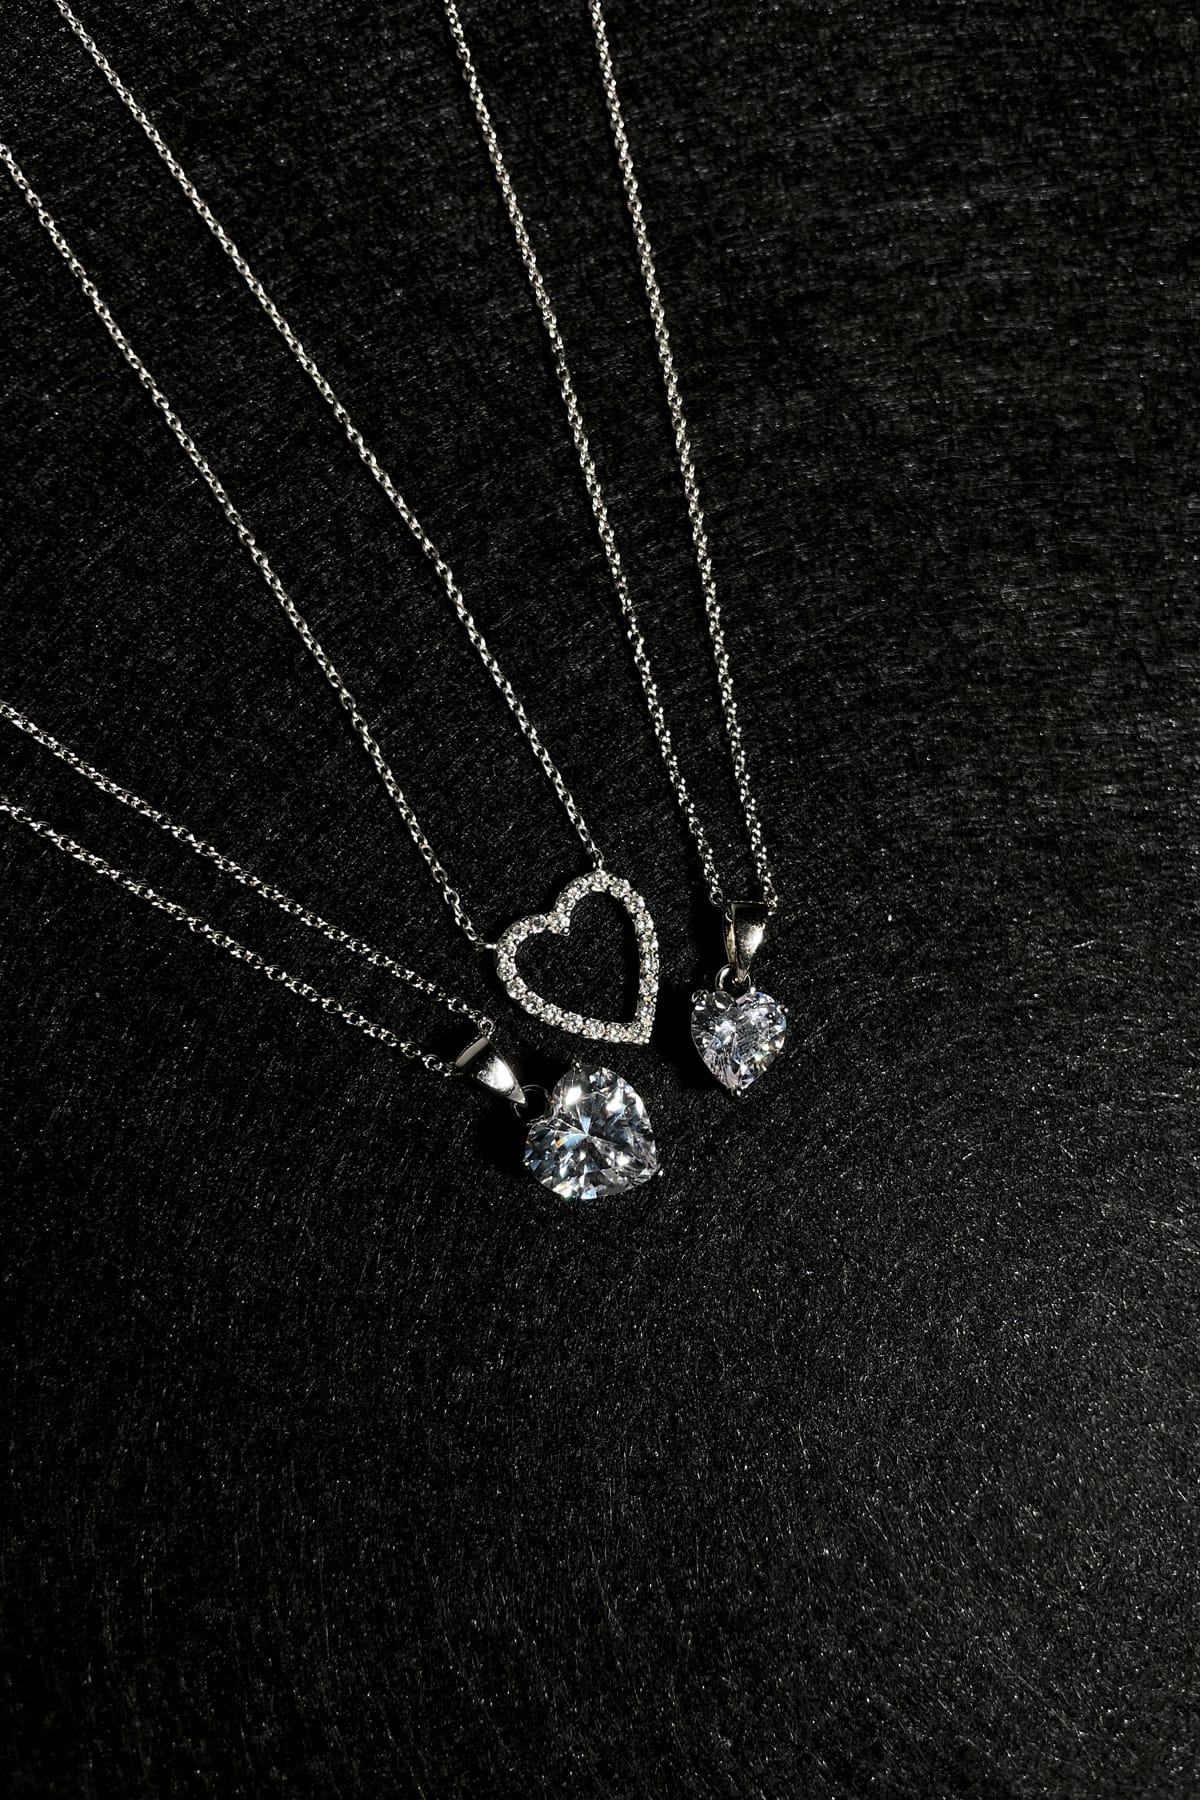 Sterling Silver 7mm Heart Cubic Zirconia Pendant with Chain available at LeGassick Diamonds and Jewellery Gold Coast, Australia.